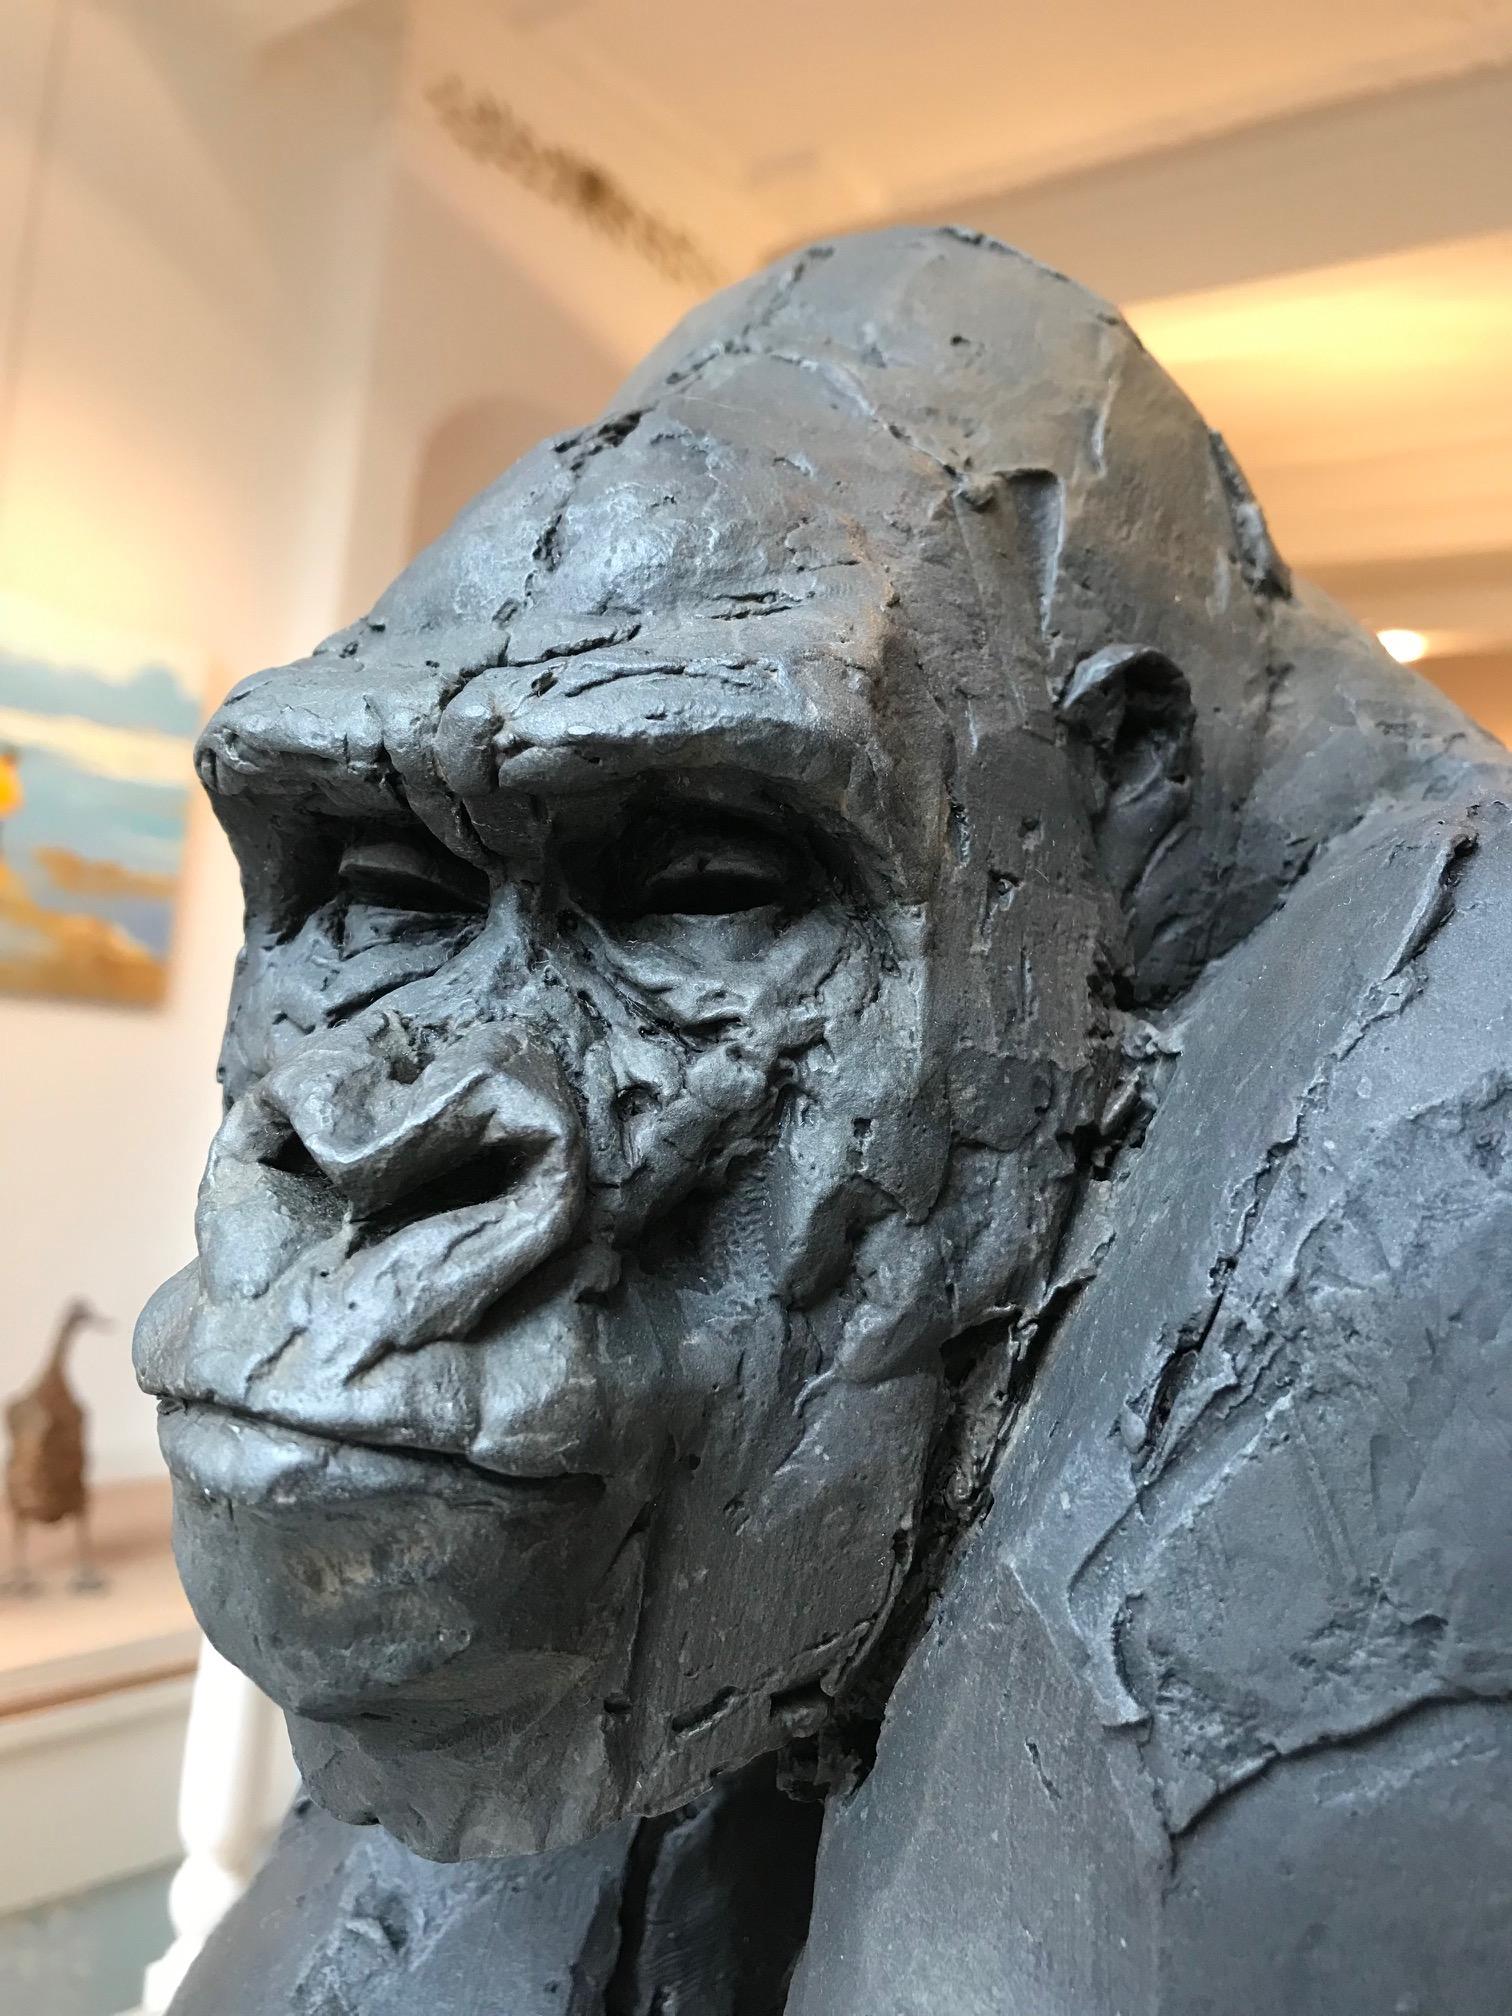 Nichola Theakston (1967) has established herself as one of the UK’s foremost contemporary sculptors working within the animal genre. 

With ''Standing Silverback'', Nichola shows how exquisite she can capture the feelings and expressions in an